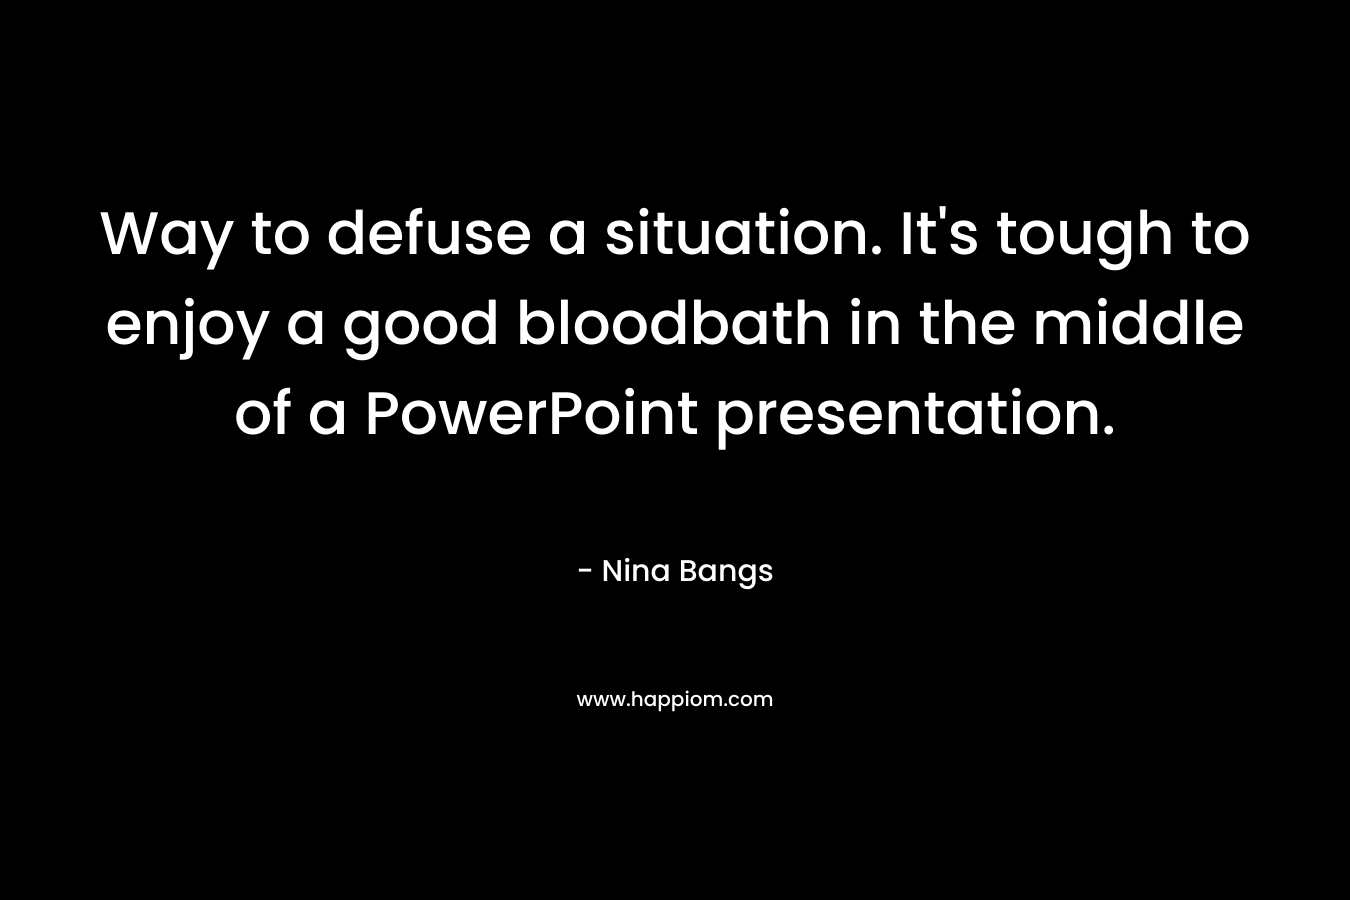 Way to defuse a situation. It’s tough to enjoy a good bloodbath in the middle of a PowerPoint presentation. – Nina Bangs